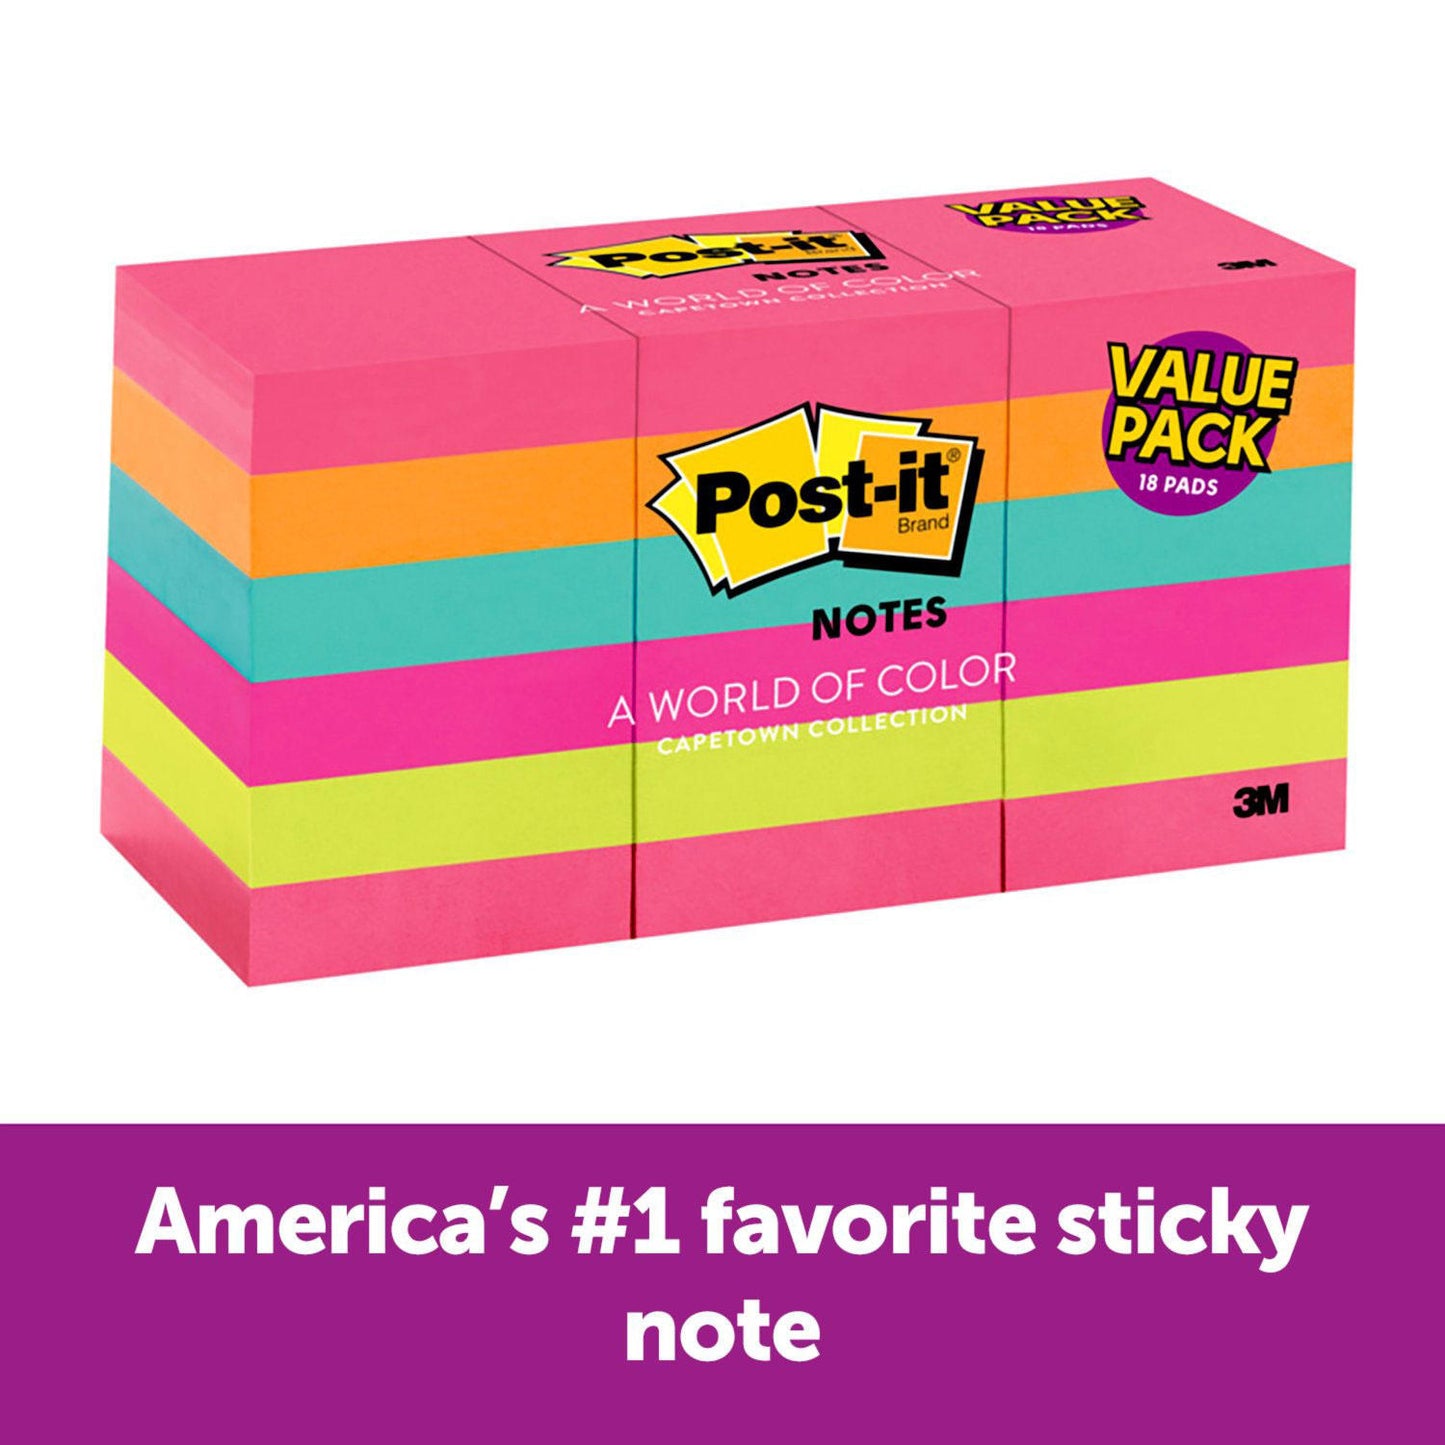 Post-it Notes Original Pads, 1.5" x 2", Jaipur Color Collection, 18 Pads, 1,800 Total Sheets